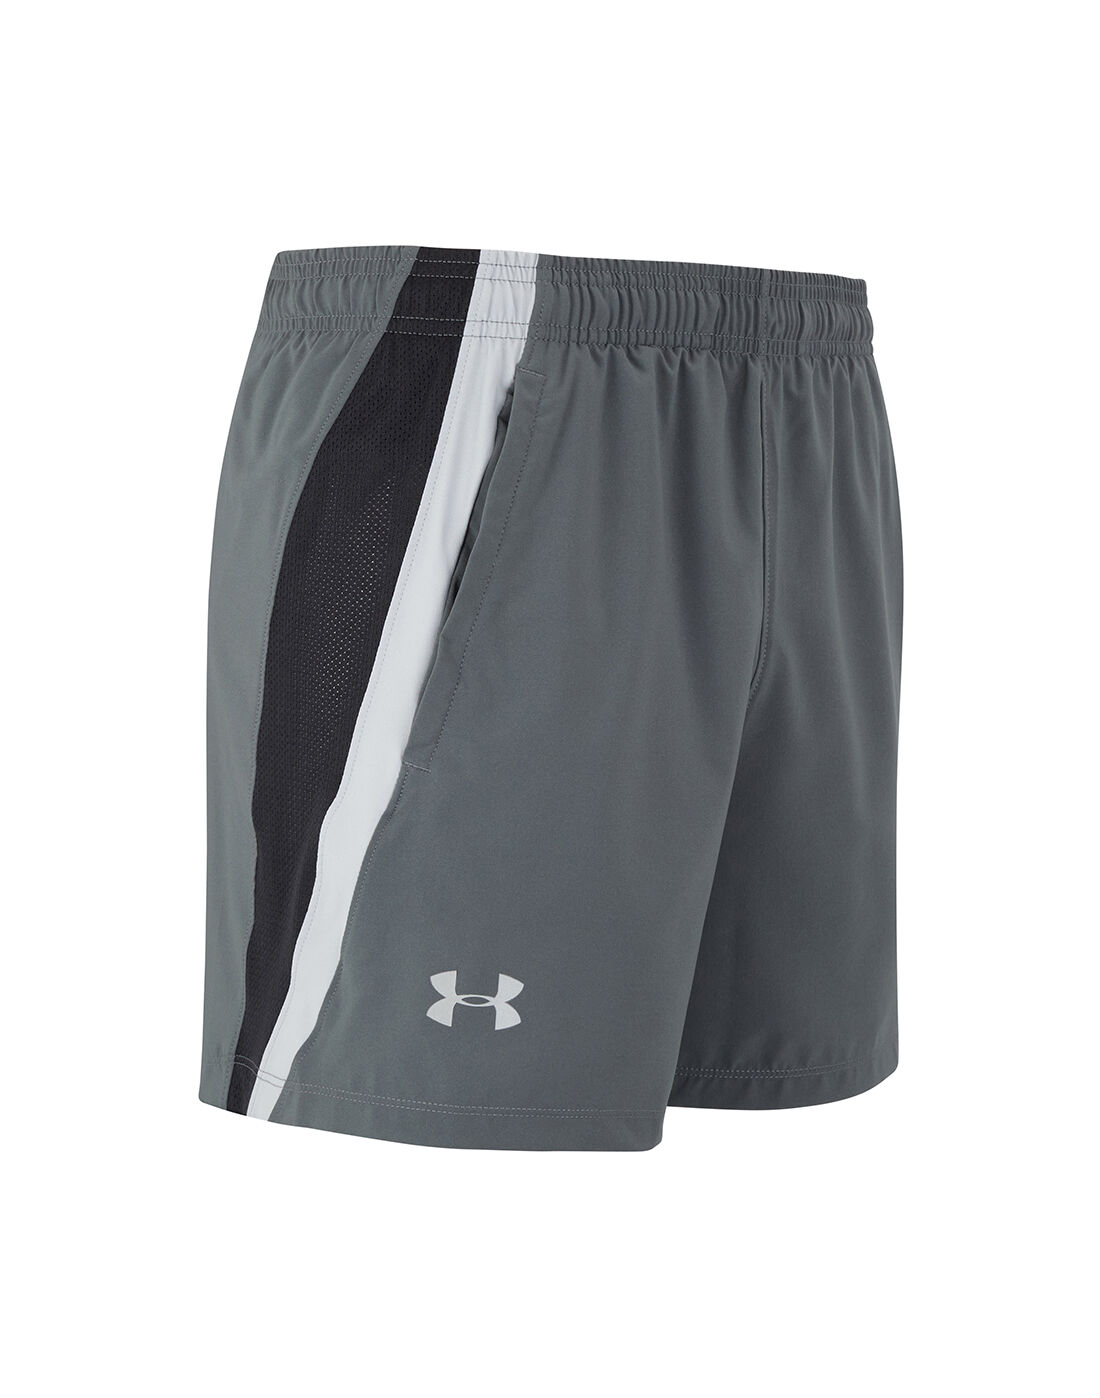 Under Armour Mens Launch 5 Inch Shorts 